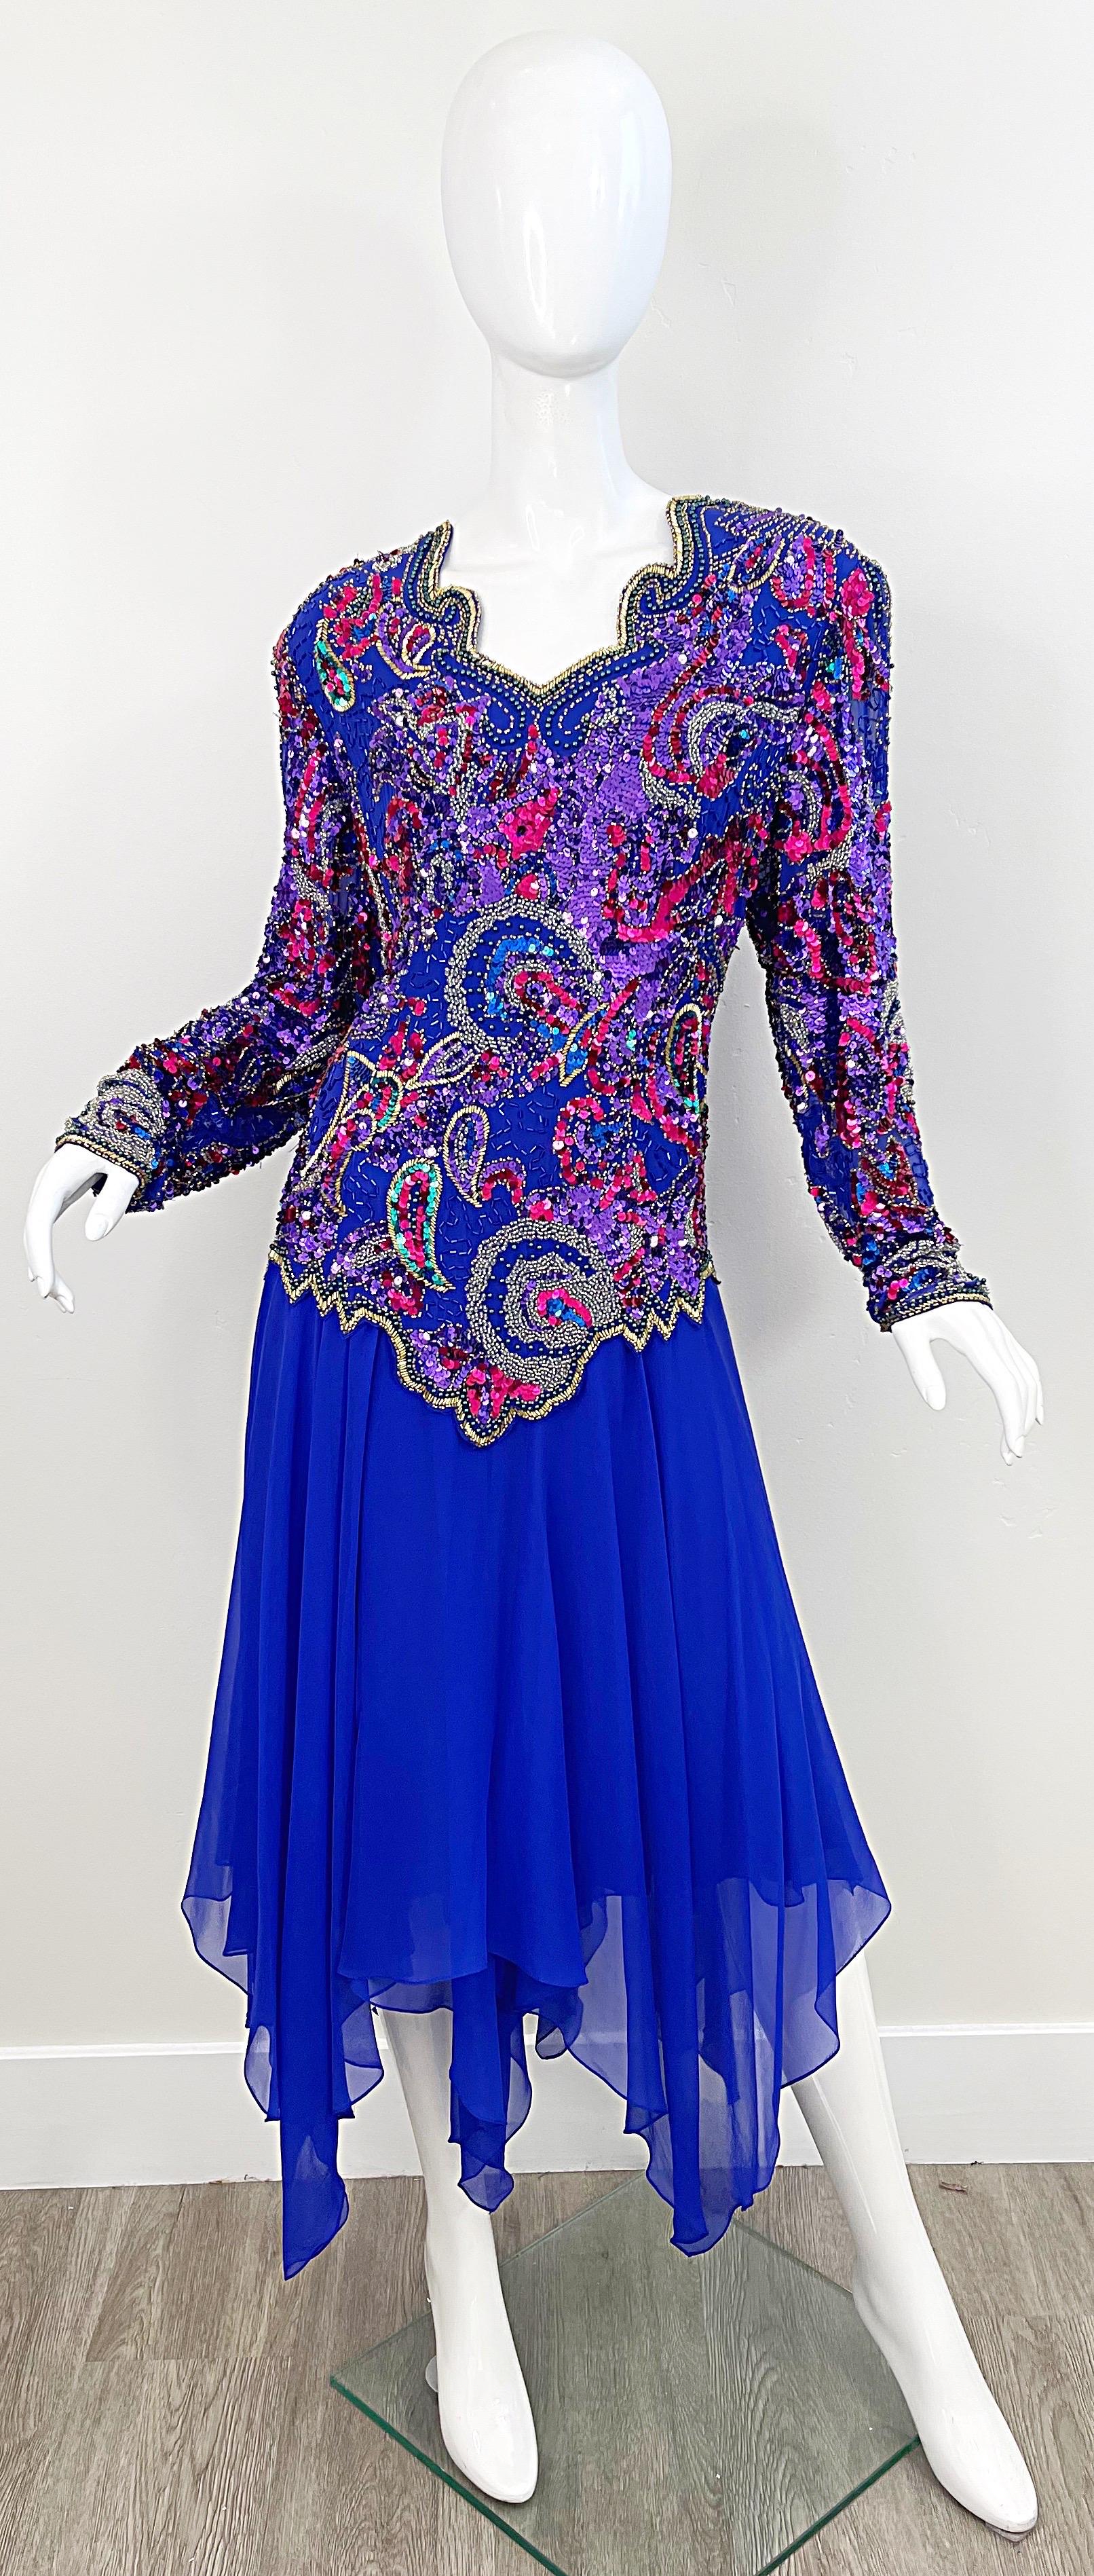 Beautiful vintage 80s OLEG CASSINI purple beaded silk chiffon drop waist handkerchief hem sequins dress ! Features thousands of hand-sewn sequins and beads in pink, purple, blue and silver. Flattering unusual v-neck. Hidden zipper up the back with